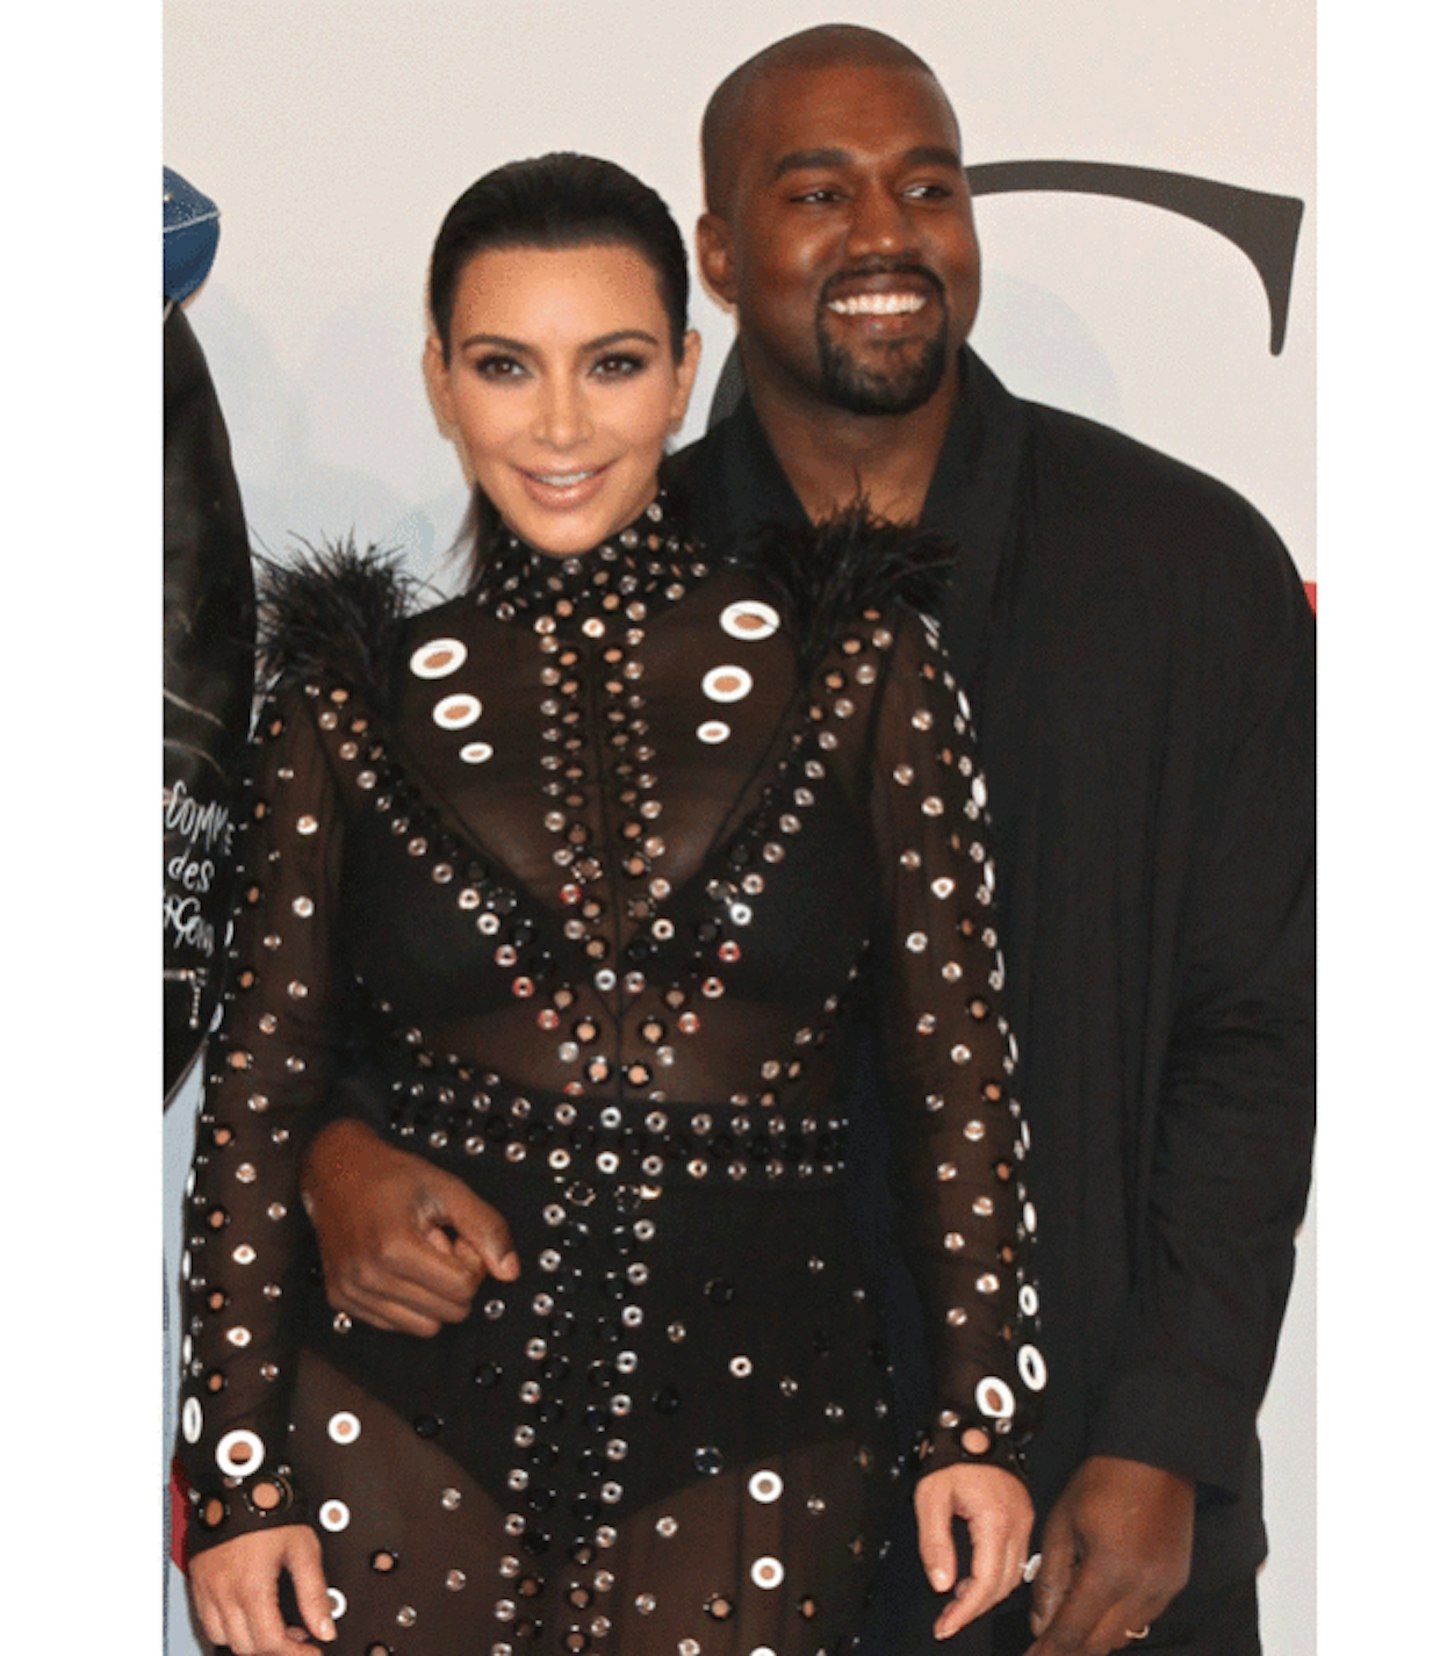 IT'S KIM - KIM'S THE ONLY THING THAT CHEERS KANYE UP!